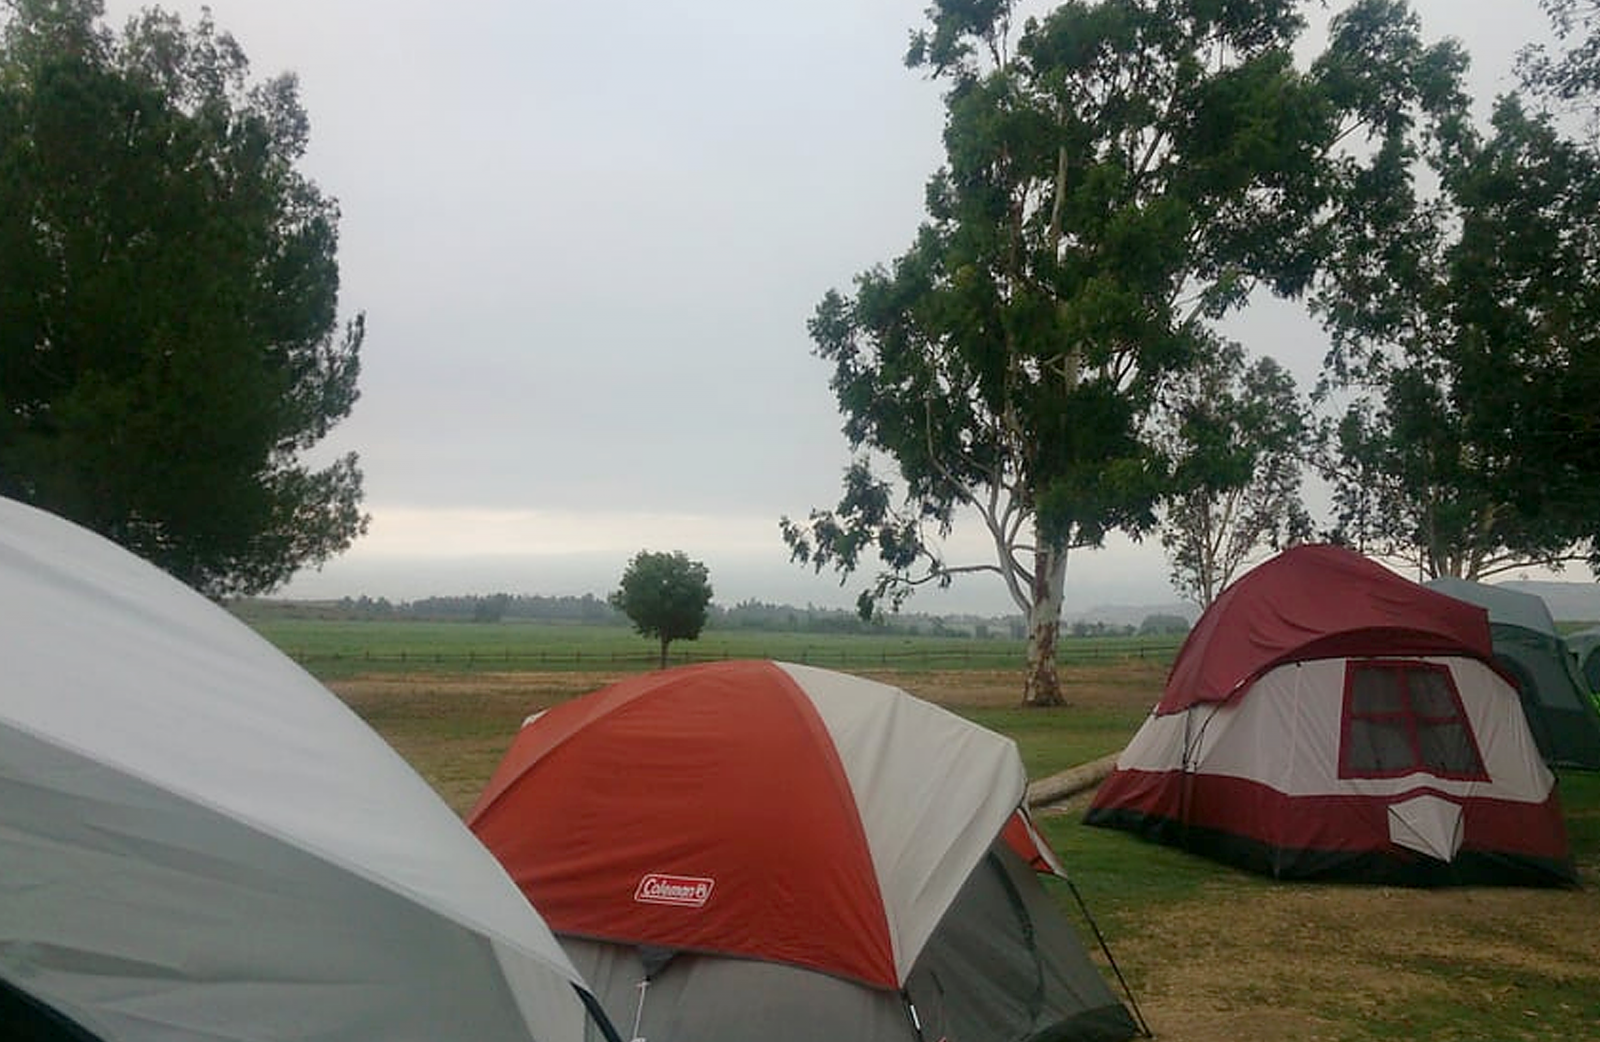 Several tents lined up on the grass at Prado park.